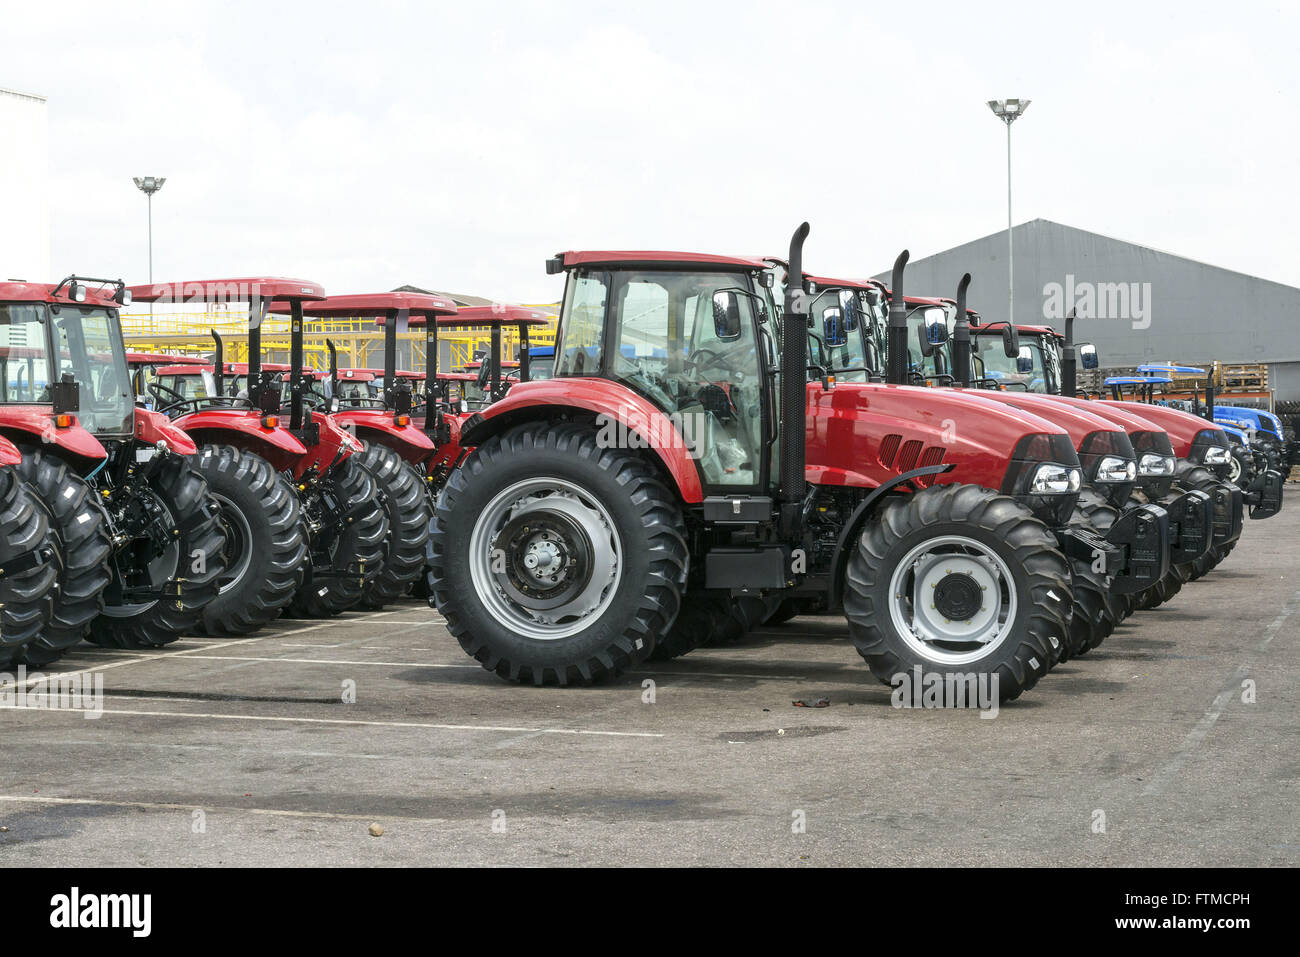 Patio in manufactures tractors Stock Photo